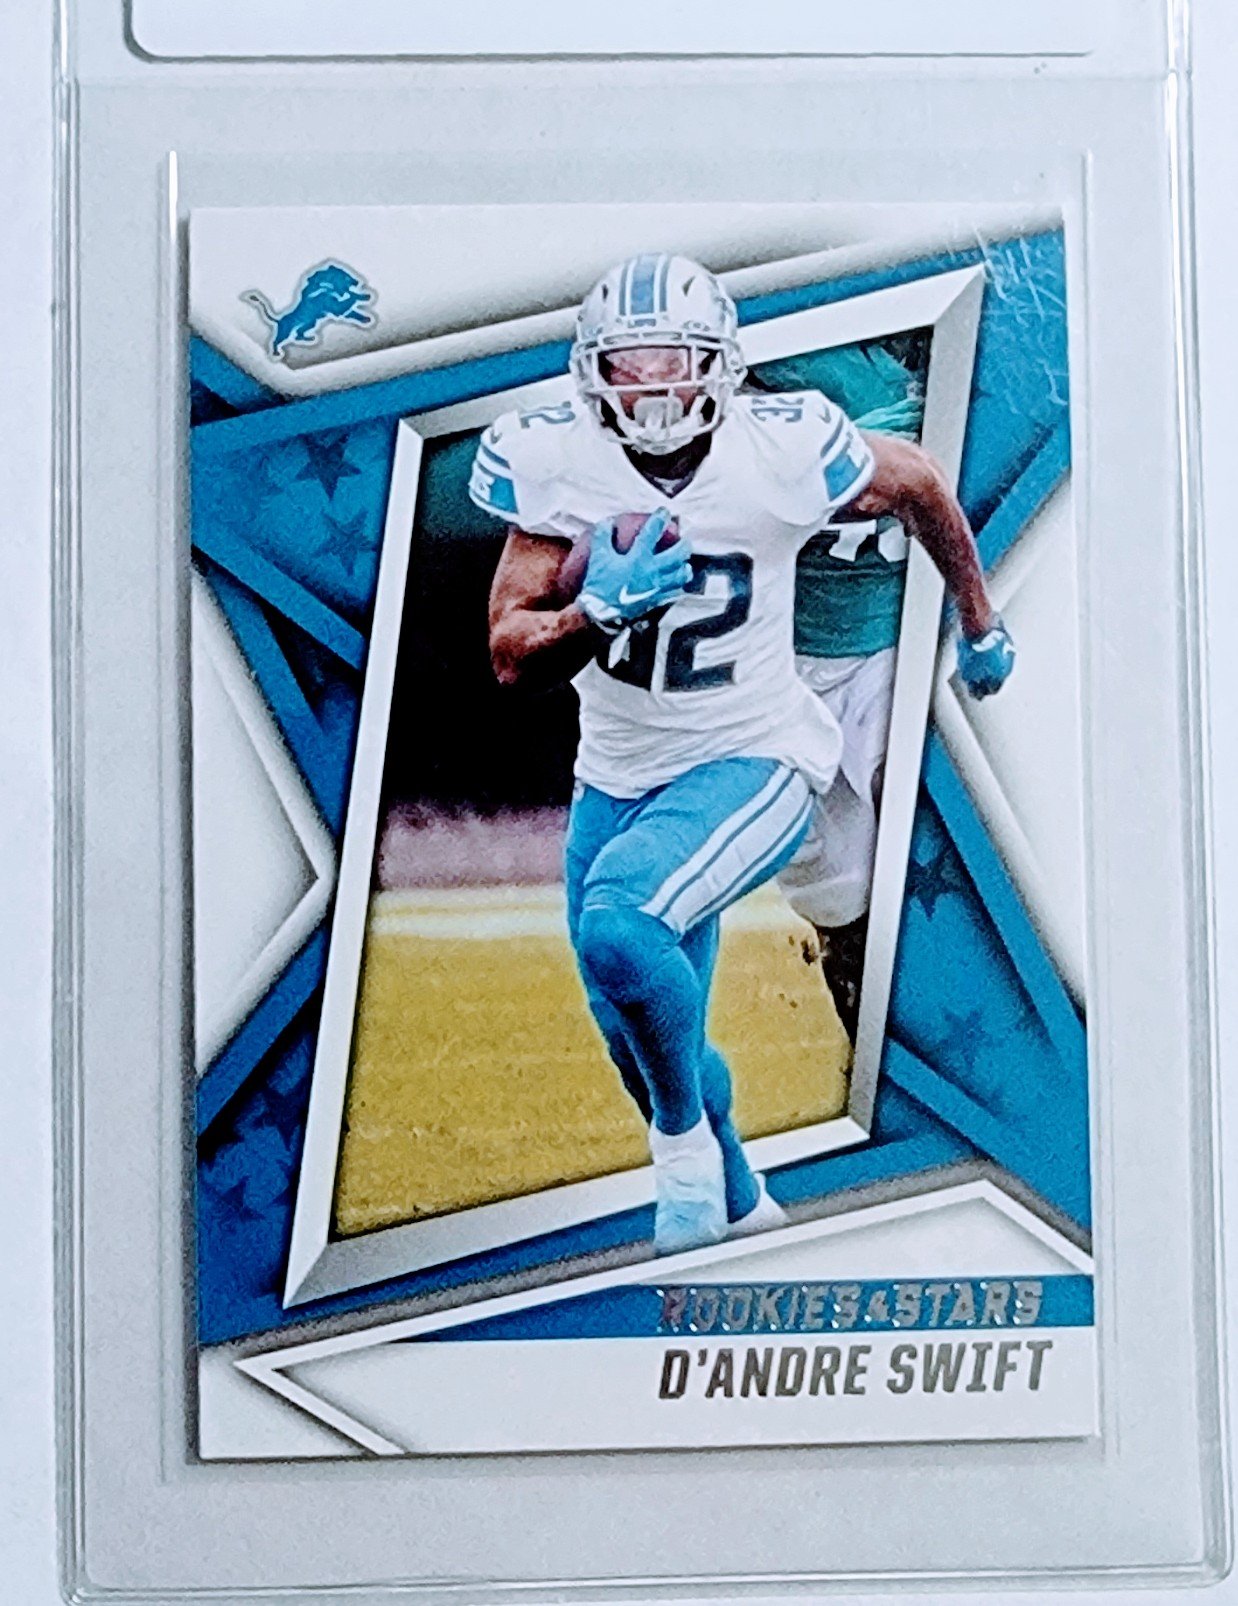 2021 Panini Rookies and Stars D'Andre Swift Football Card AVM1 simple Xclusive Collectibles   